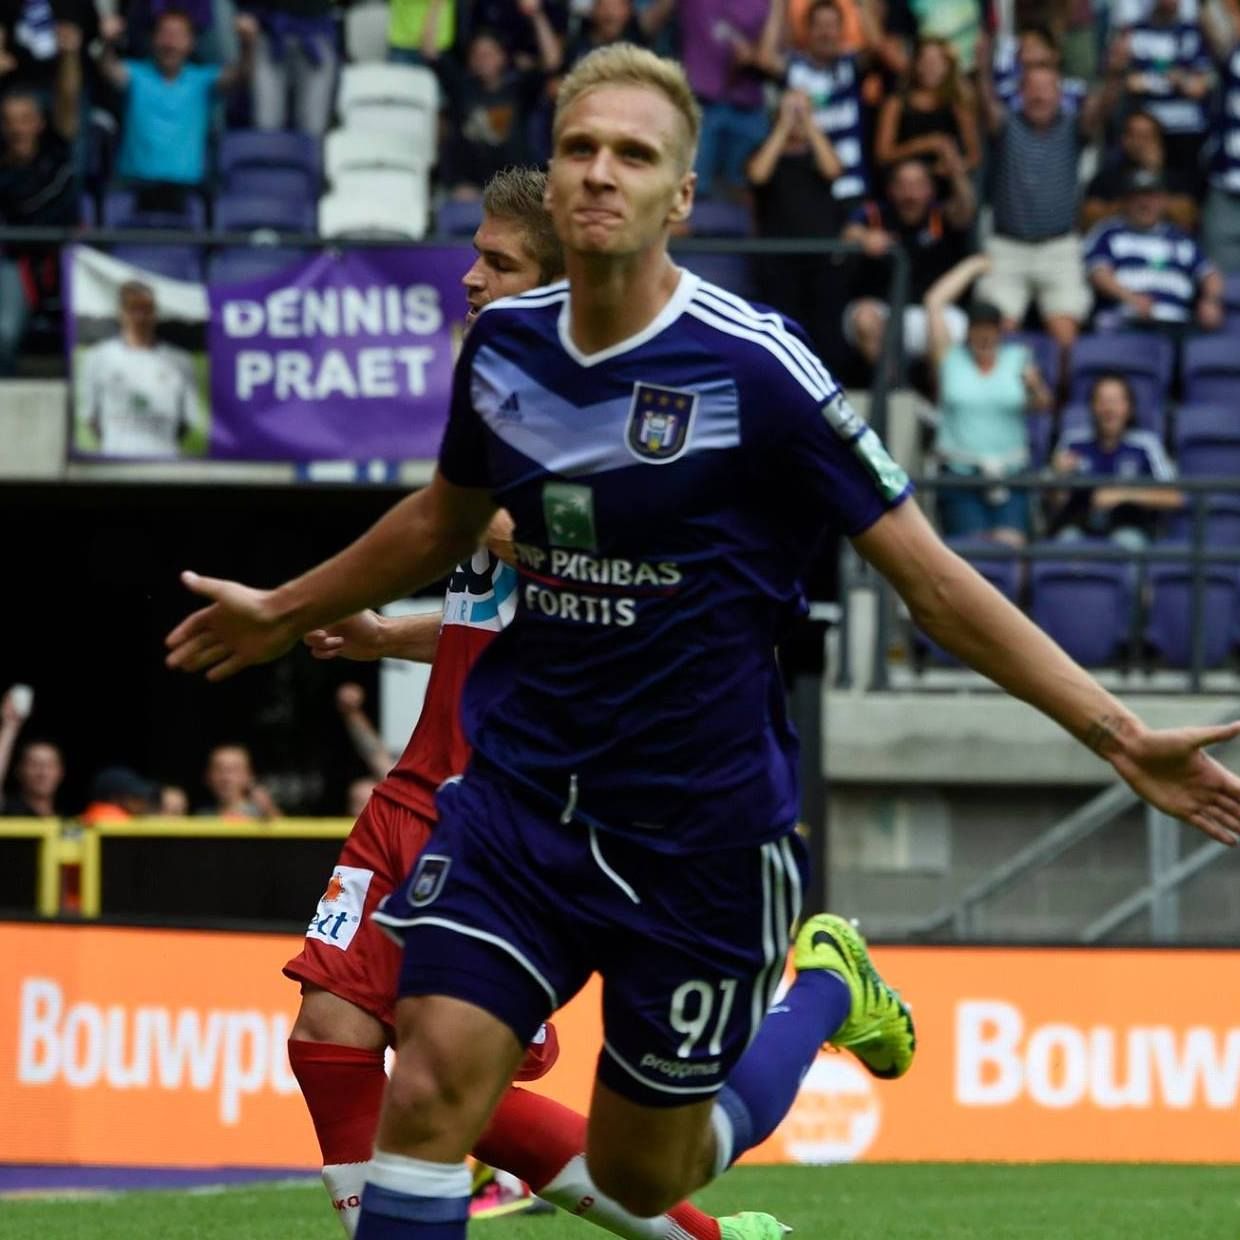 Goal and assist for Teodorczyk in the first game for Anderlecht